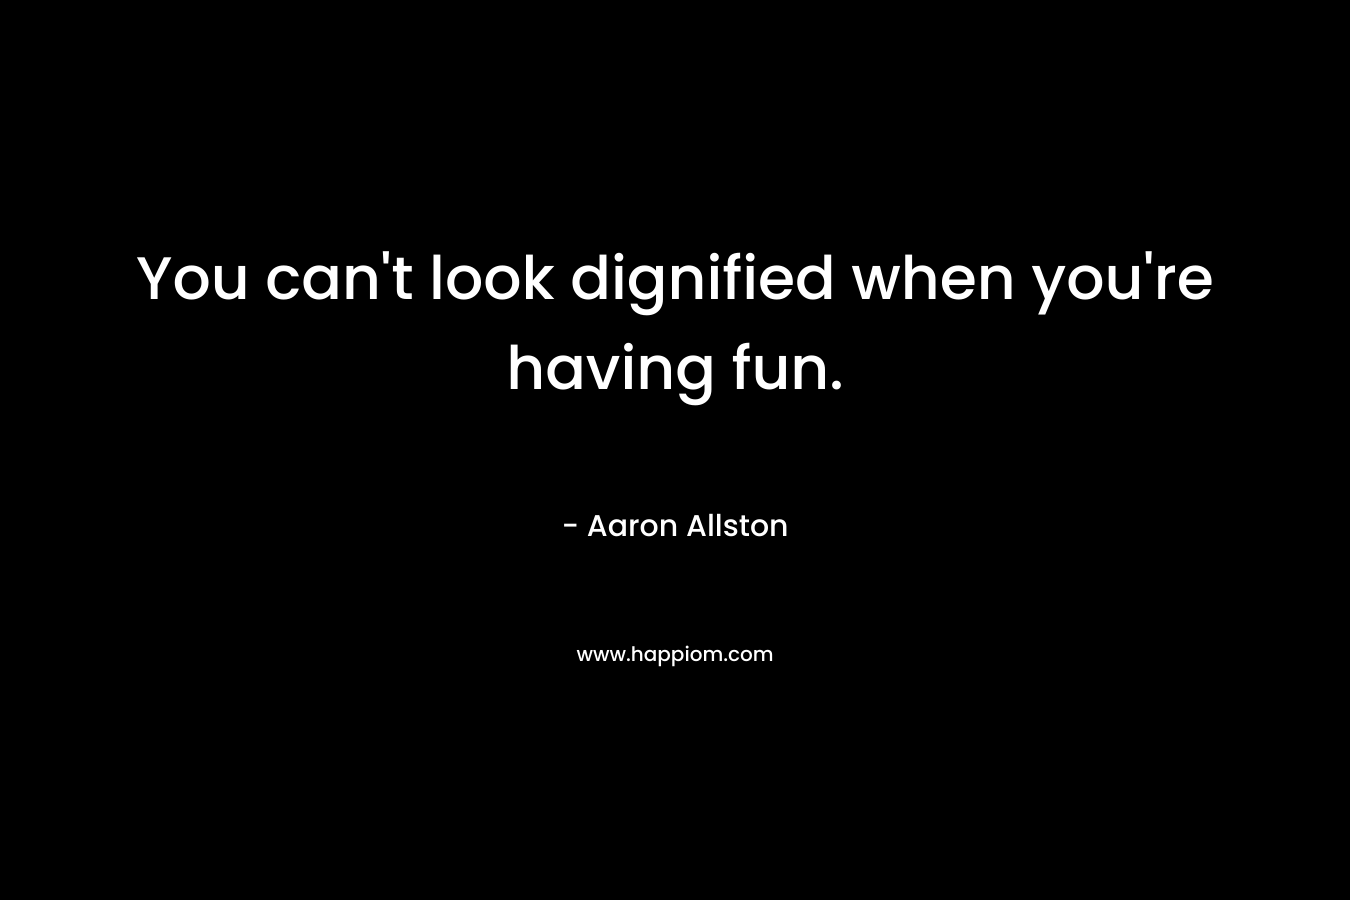 You can’t look dignified when you’re having fun. – Aaron Allston